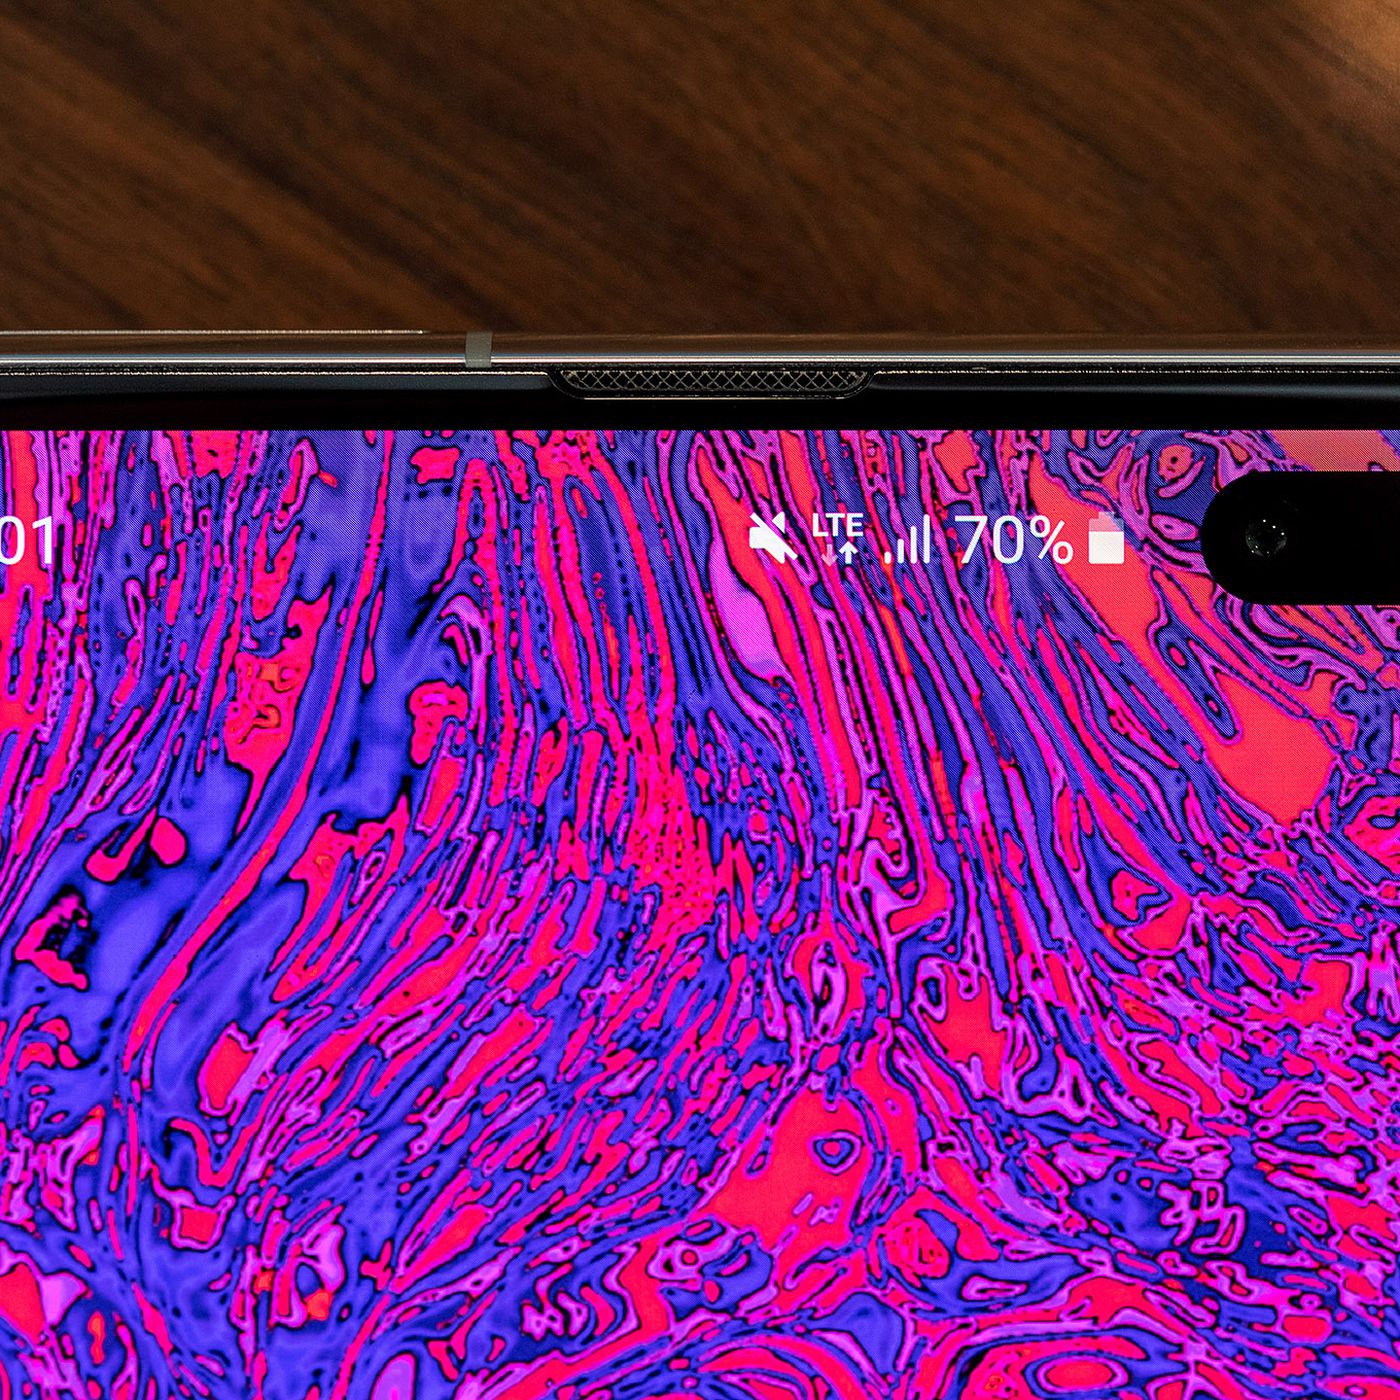 The Best Part Of Galaxy S10 S Hole Punch Is Potential For